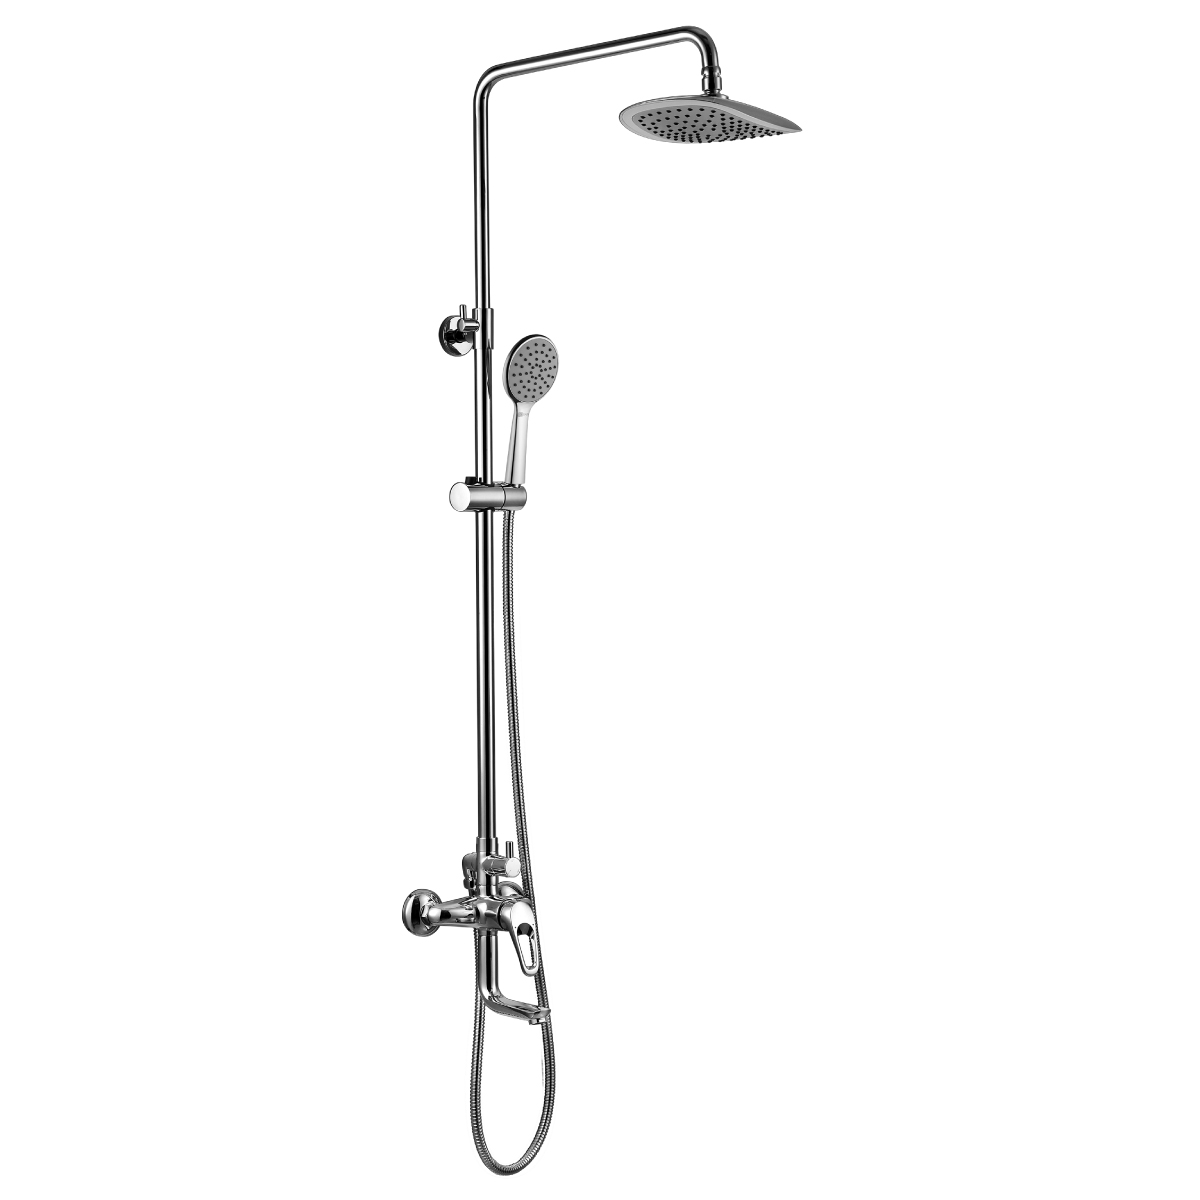 LM3162C Bath and shower faucet with adjustable rod height, swivel spout and «Tropical rain» shower head